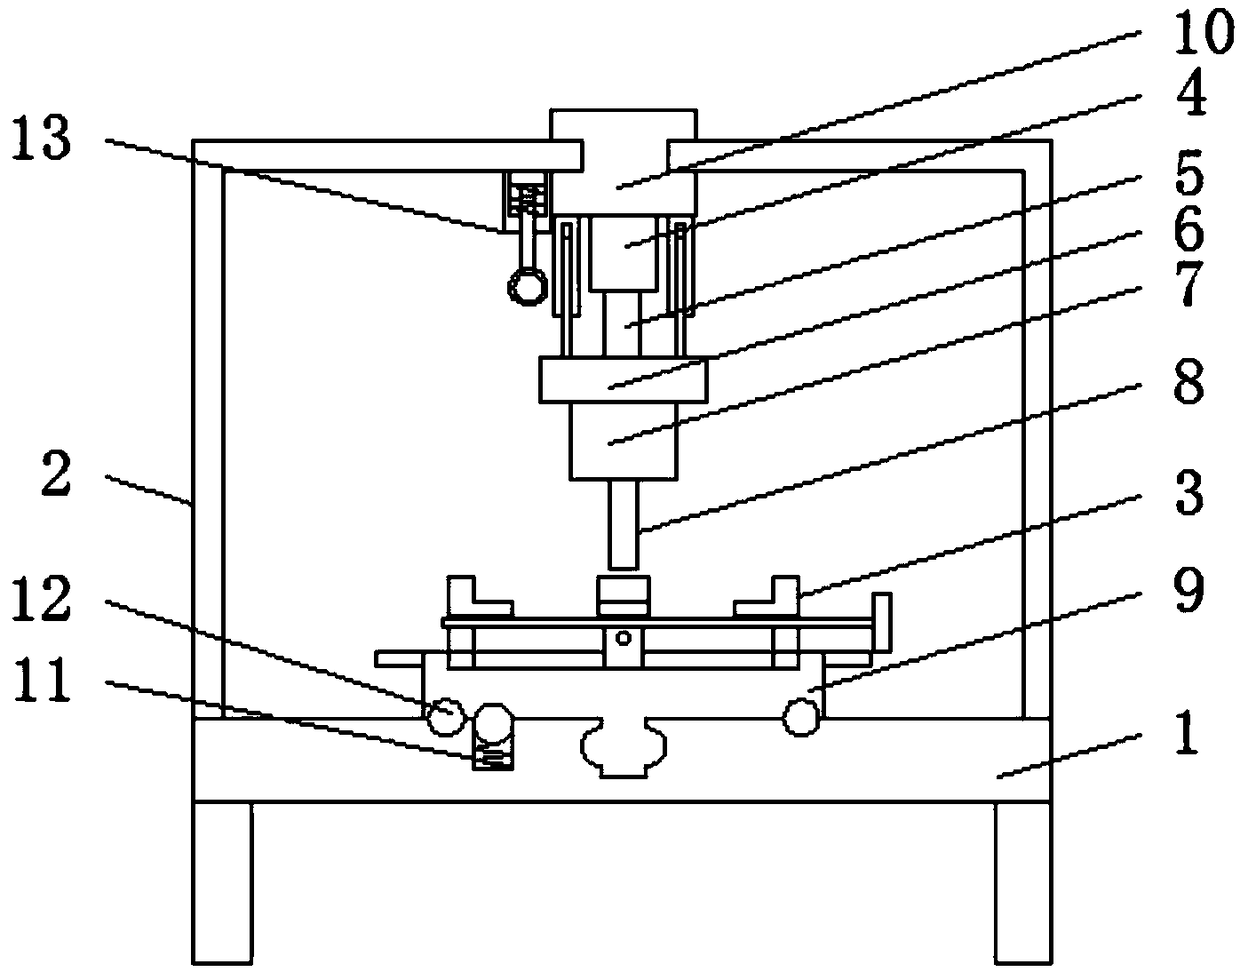 Drilling device used for forged steel pressure release valve connecting flange machining